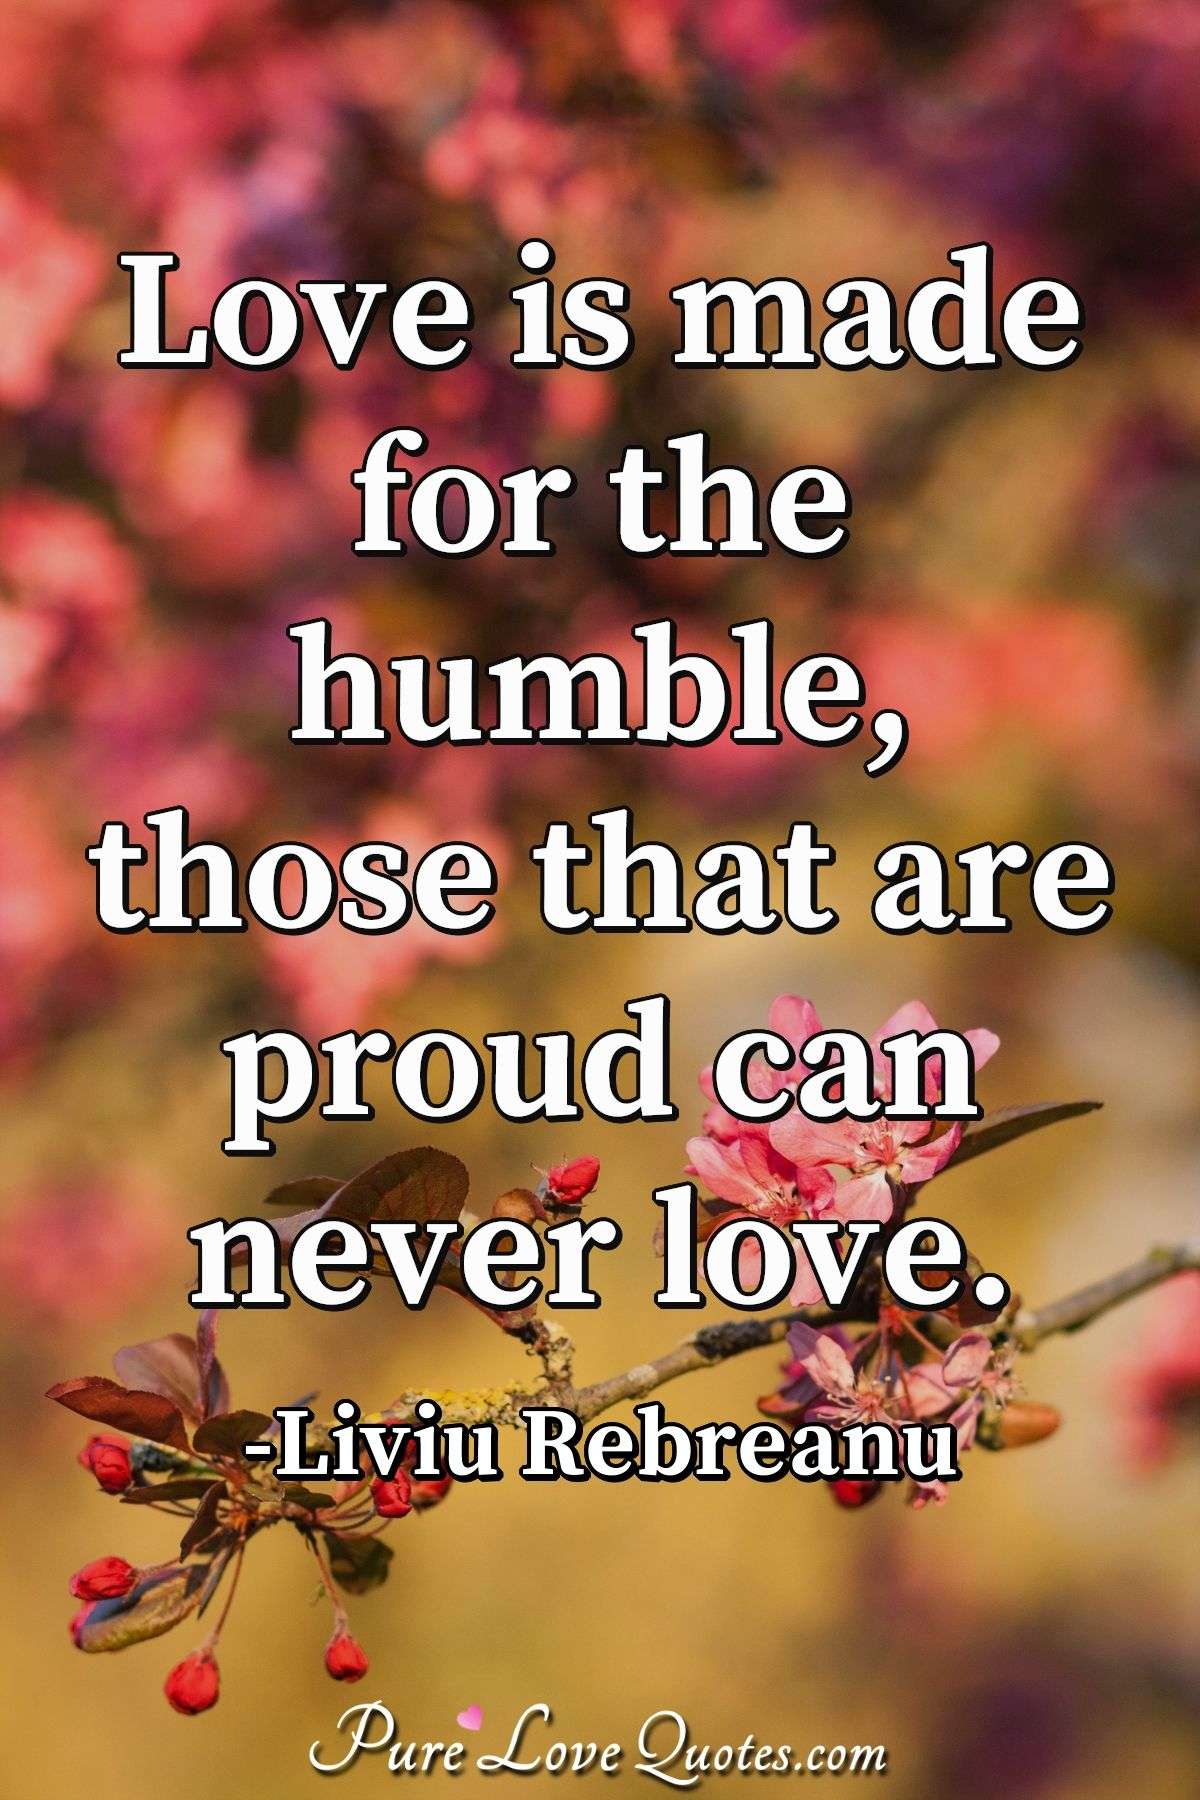 Love is made for the humble, those that are proud can never love. - Liviu Rebreanu